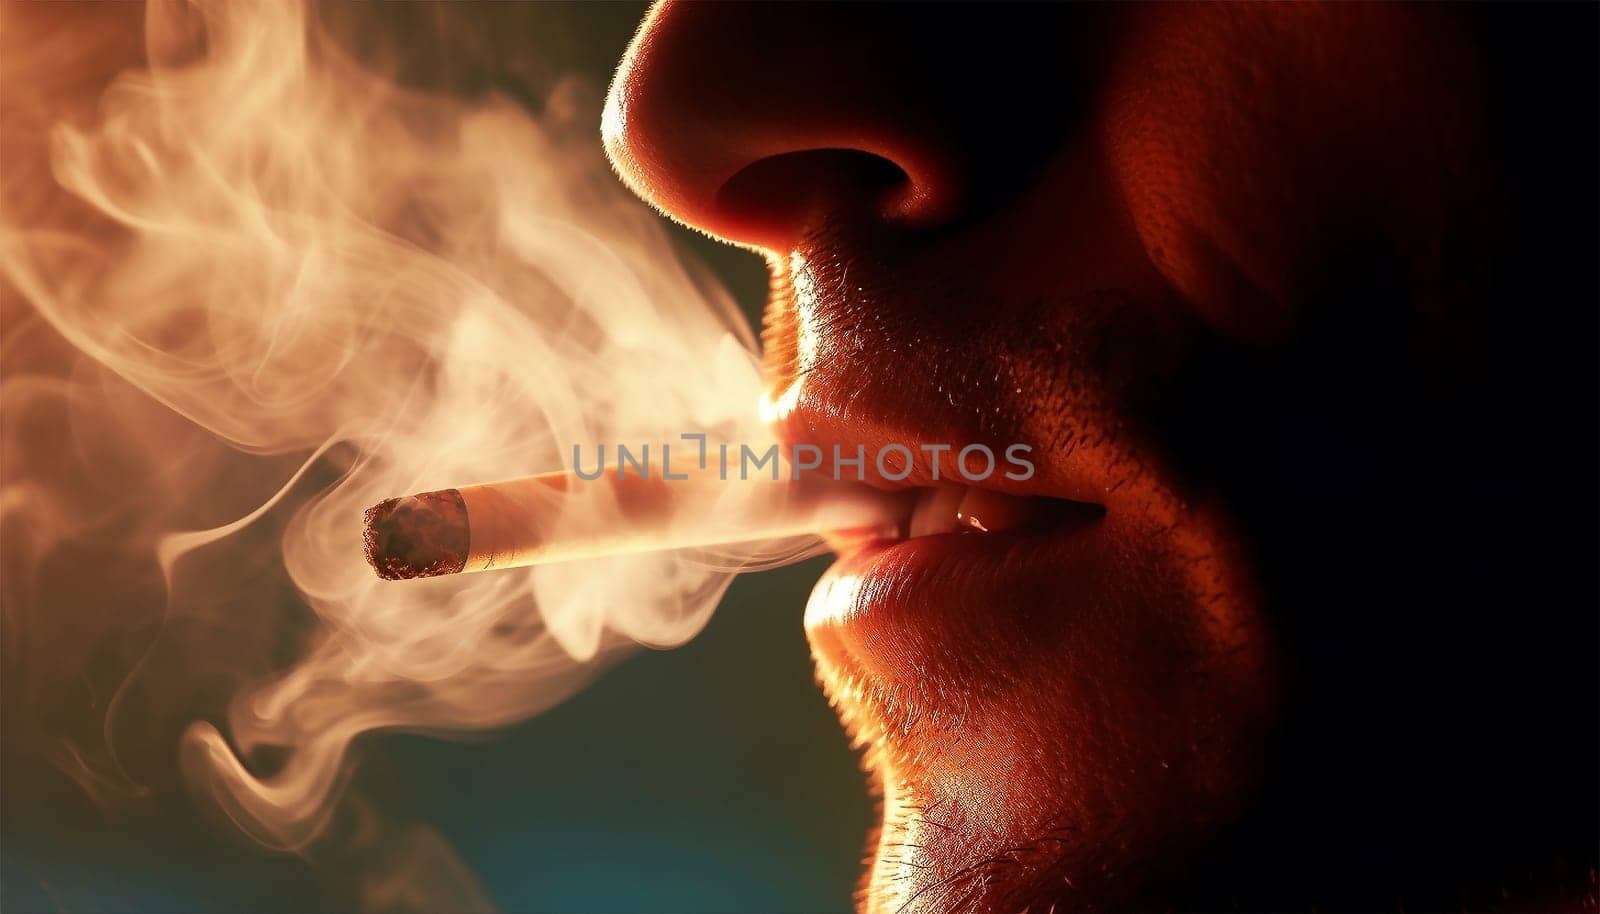 Stop smoking cigarettes concept. Portrait cigarette in mouth. Background surrounded with smoke. quitting smoking cigarettes. Quit bad habit, health care concept. No smoking. Copy space Space for text